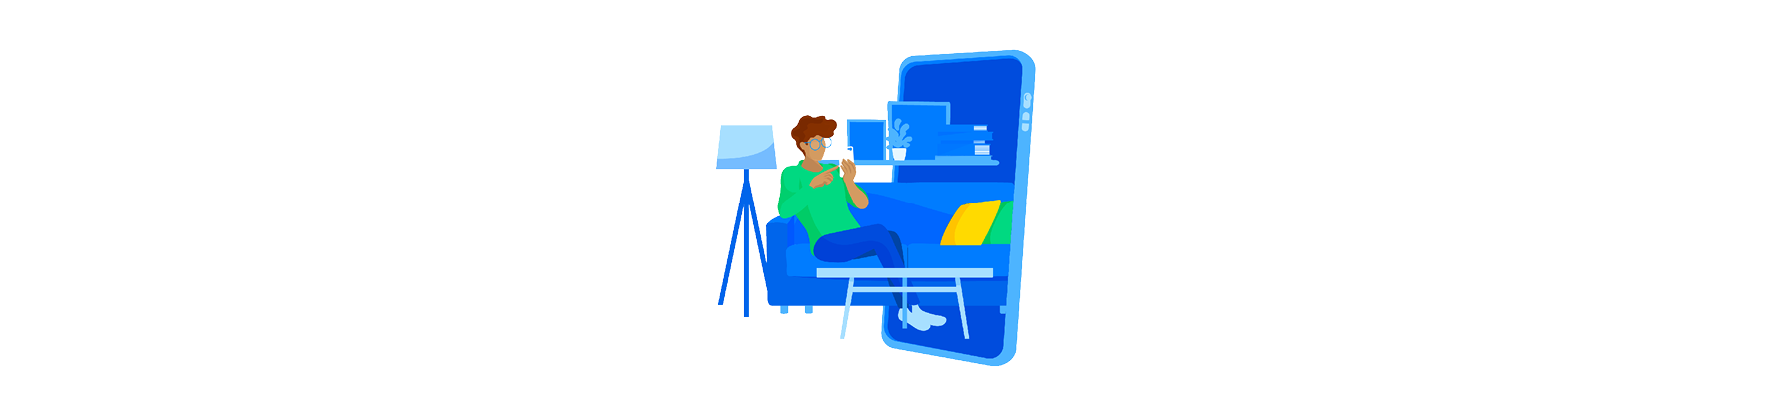 Illustrated icon of a person shopping from home